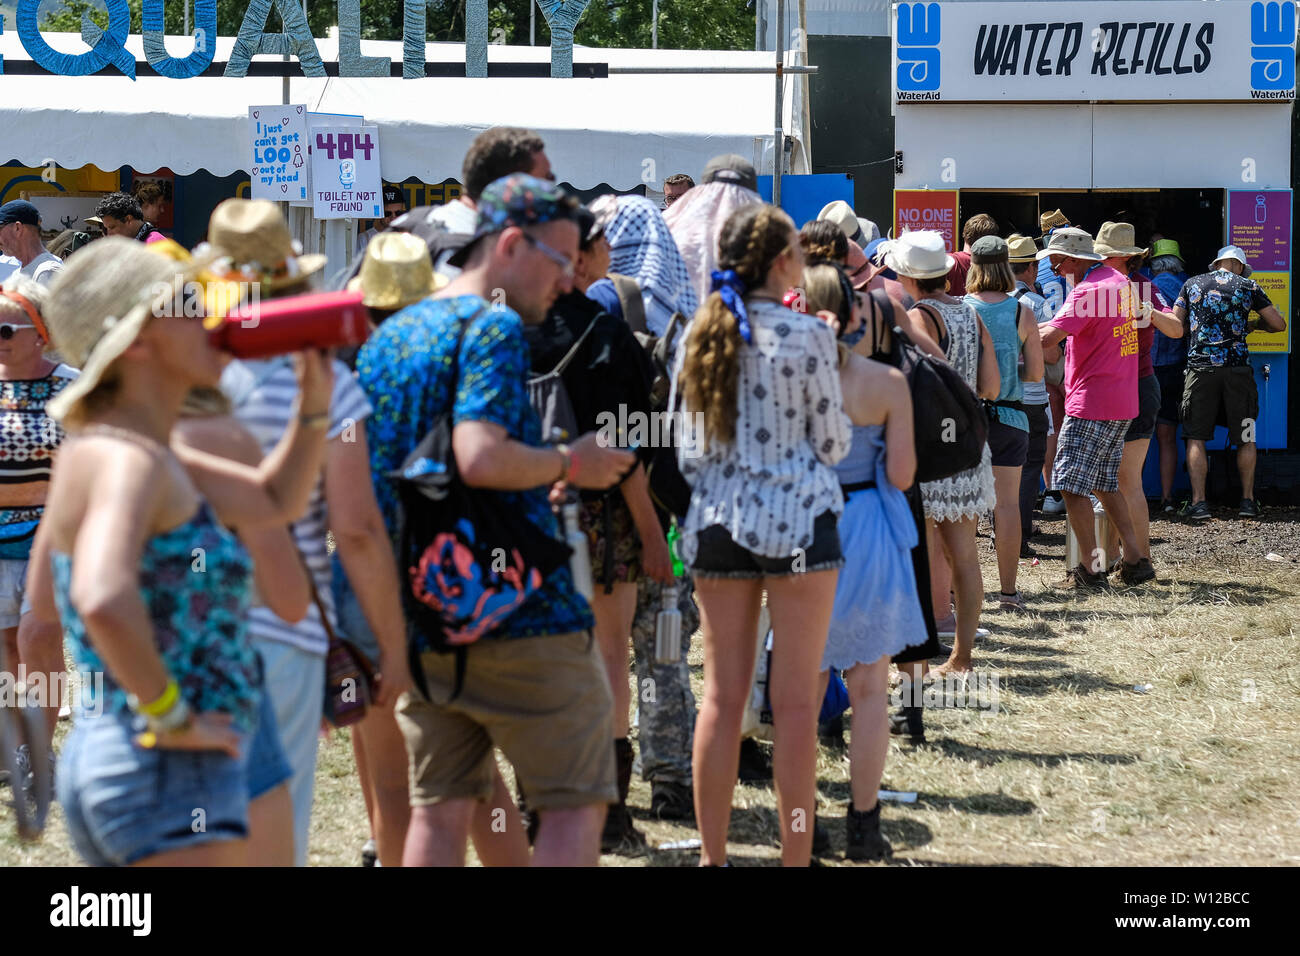 Glastonbury, Somerset, UK. 29th June, 2019. Queues for refills of water at Glastonbury Festival 2019 on Saturday 29 June 2019 at Worthy Farm, Pilton. Picture by Credit: Julie Edwards/Alamy Live News Stock Photo